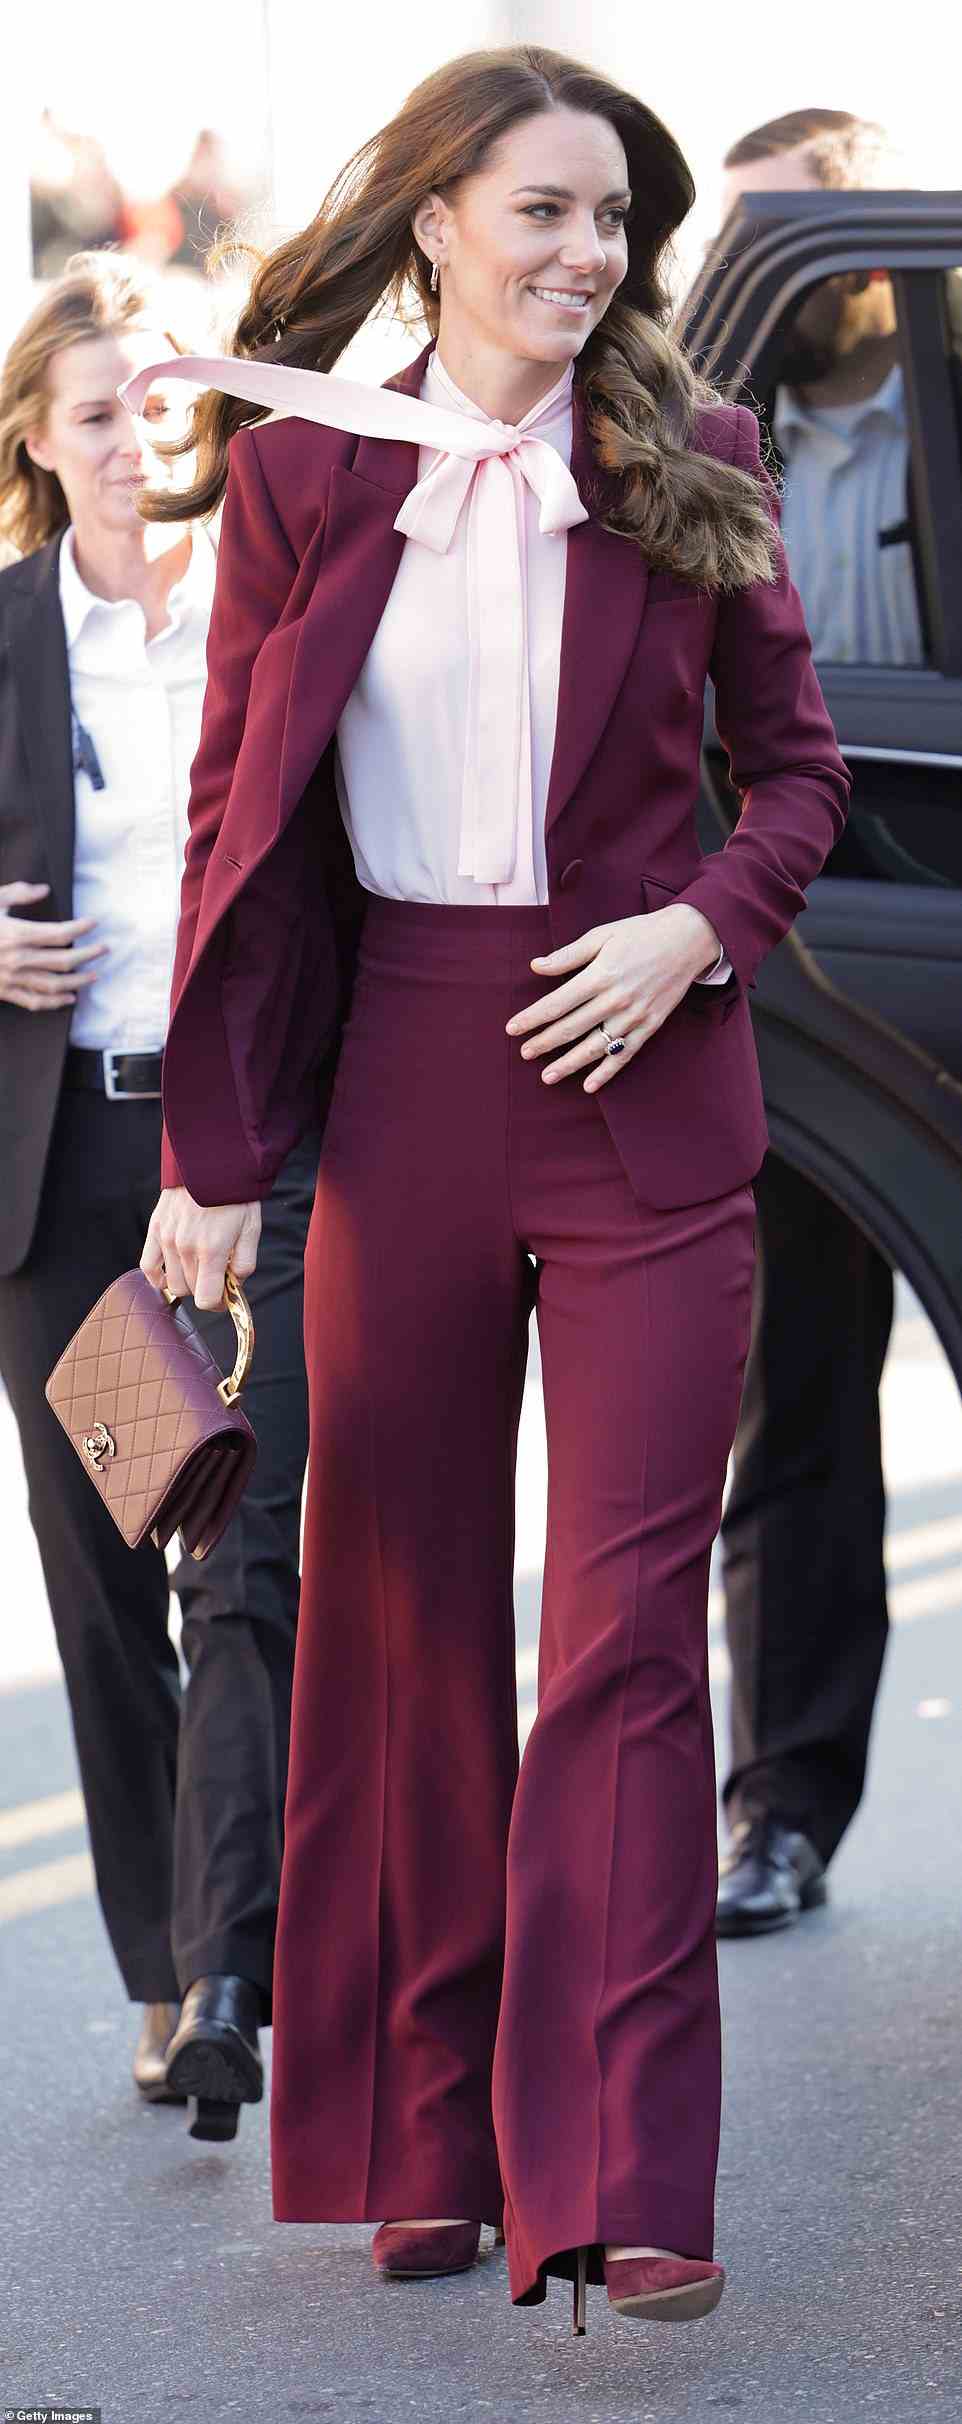 The mother-of-three donned a pair of $534 high-waisted maroon trousers and a matching $2,190 blazer - which is currently sold out in the color Kate wore - made by the British luxury fashion house, as well as a pink tie-neck blouse underneath